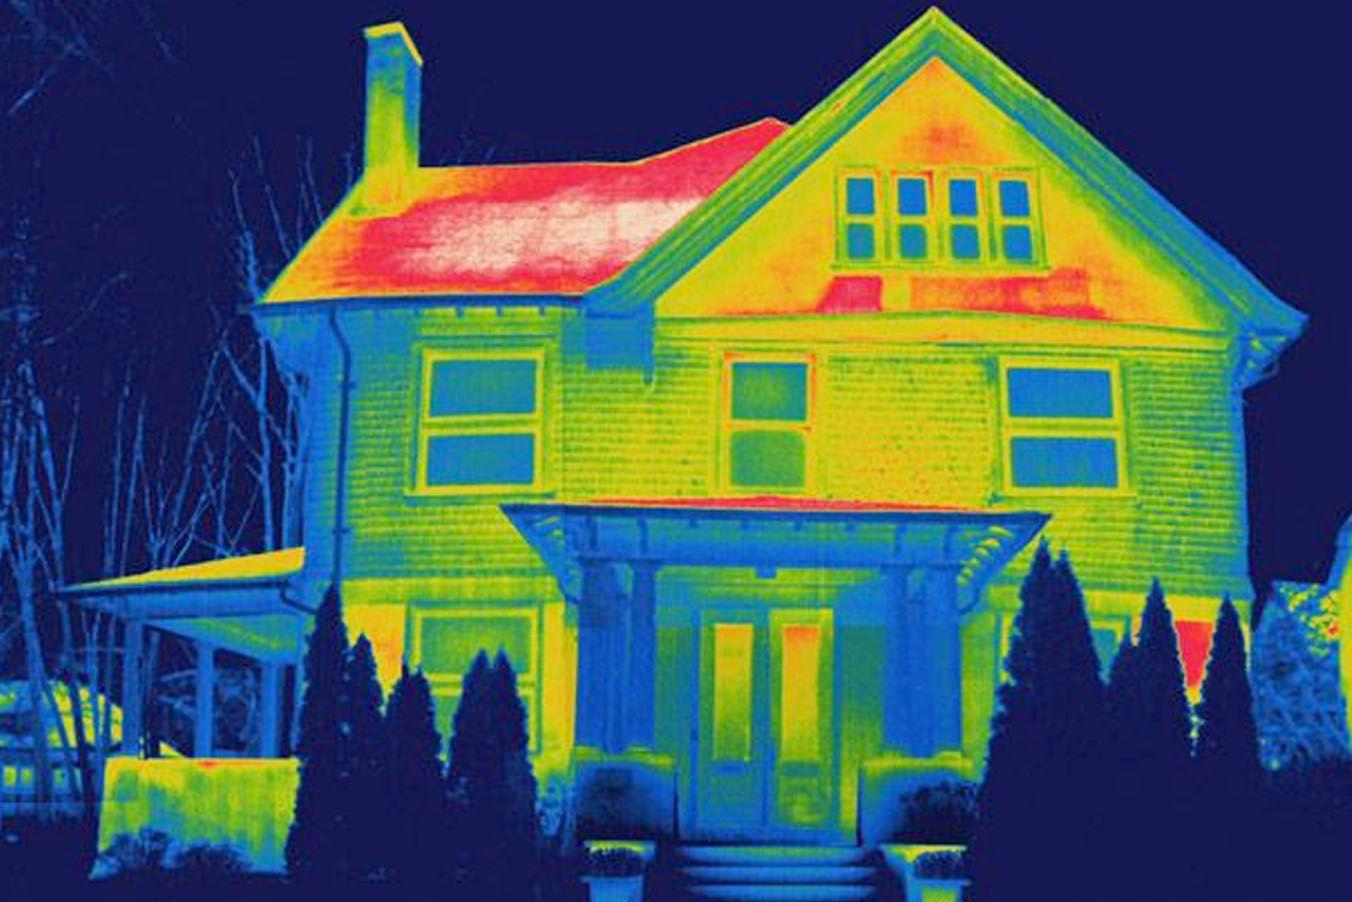 https://www.digitaltrends.com/wp-content/uploads/2014/01/thermal-view-house.jpg?fit=720%2C720&p=1